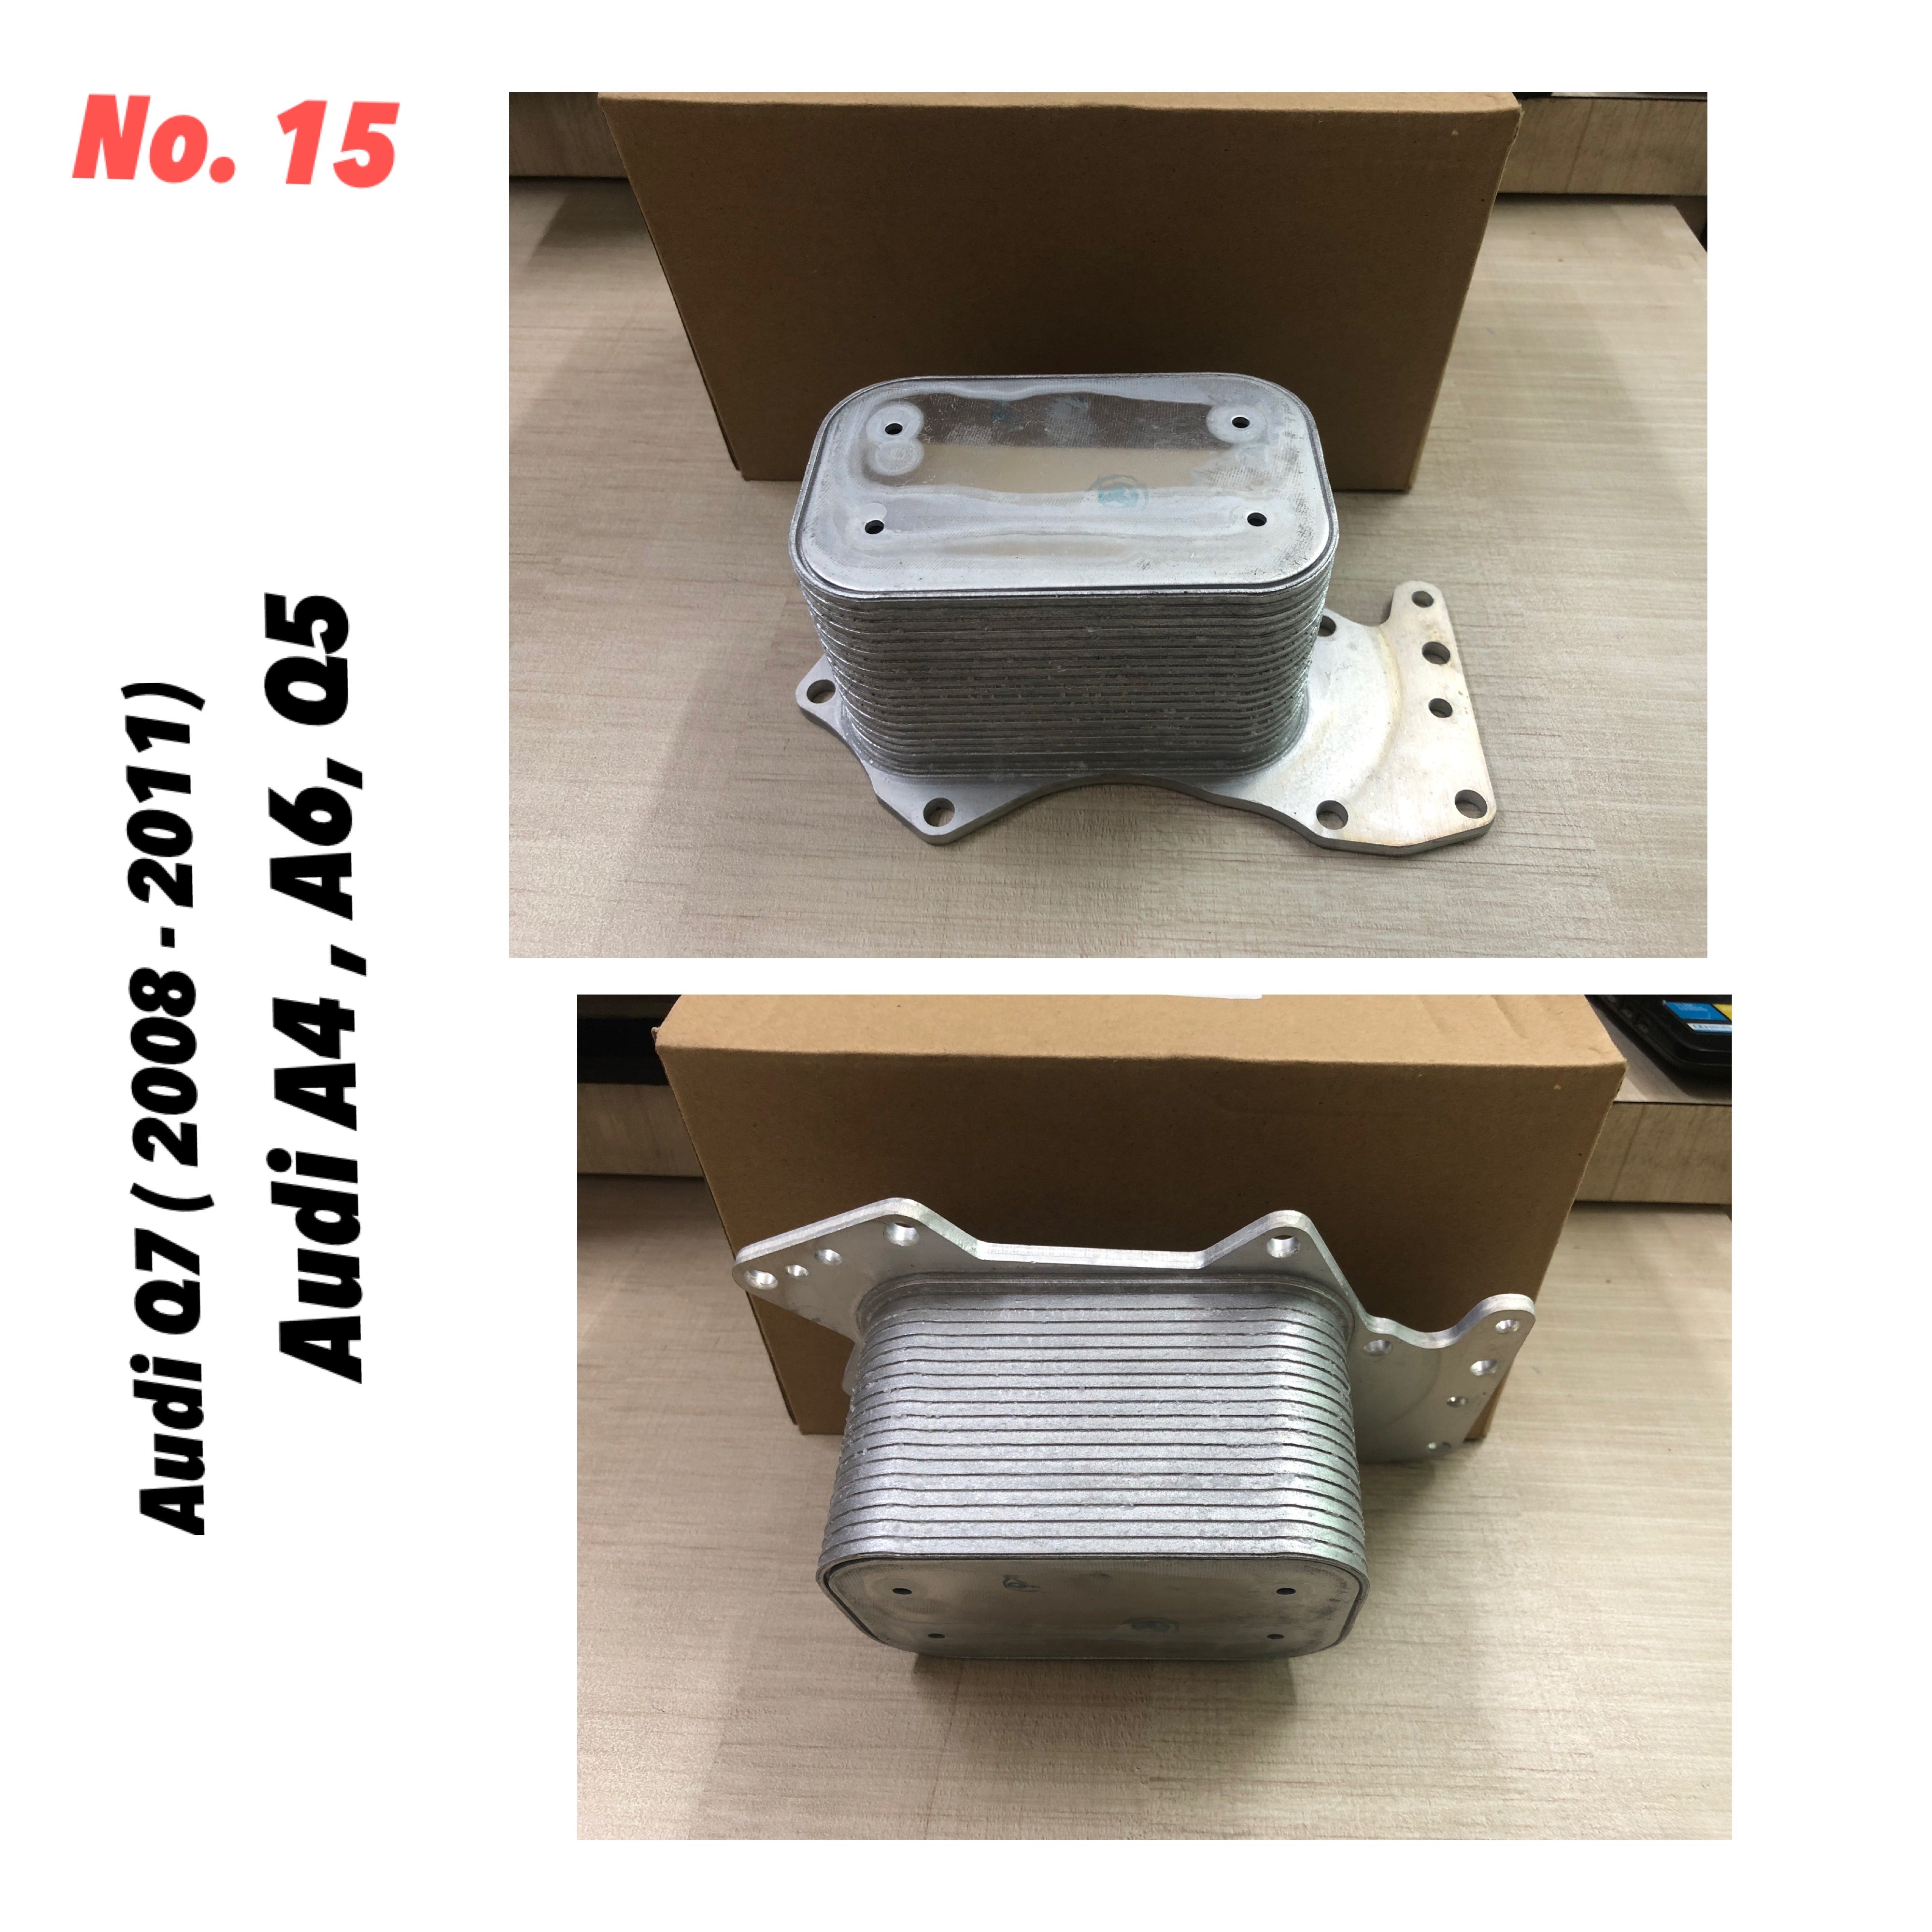 059117021K Oil Cooler for 2008-2011 Audi A4 A6 Q5 Q7 Tag-O-15